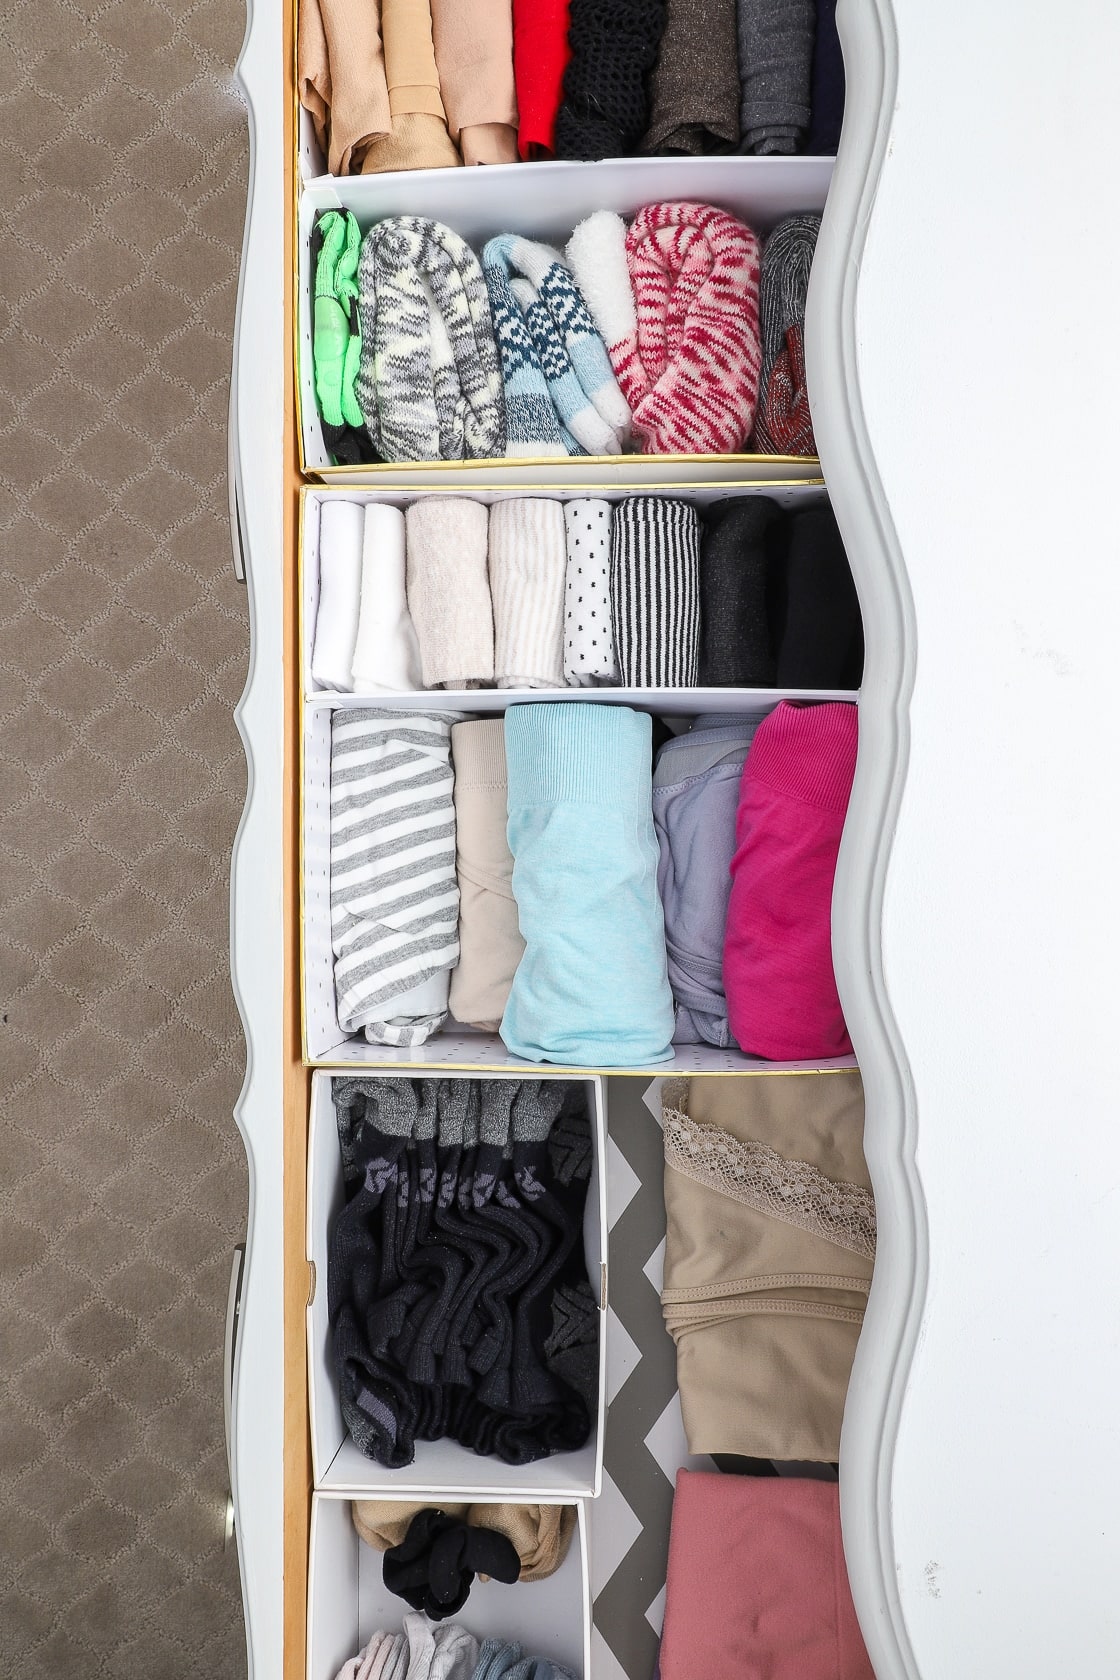 Organize Your Kids' Clothes with a Socks Dispenser